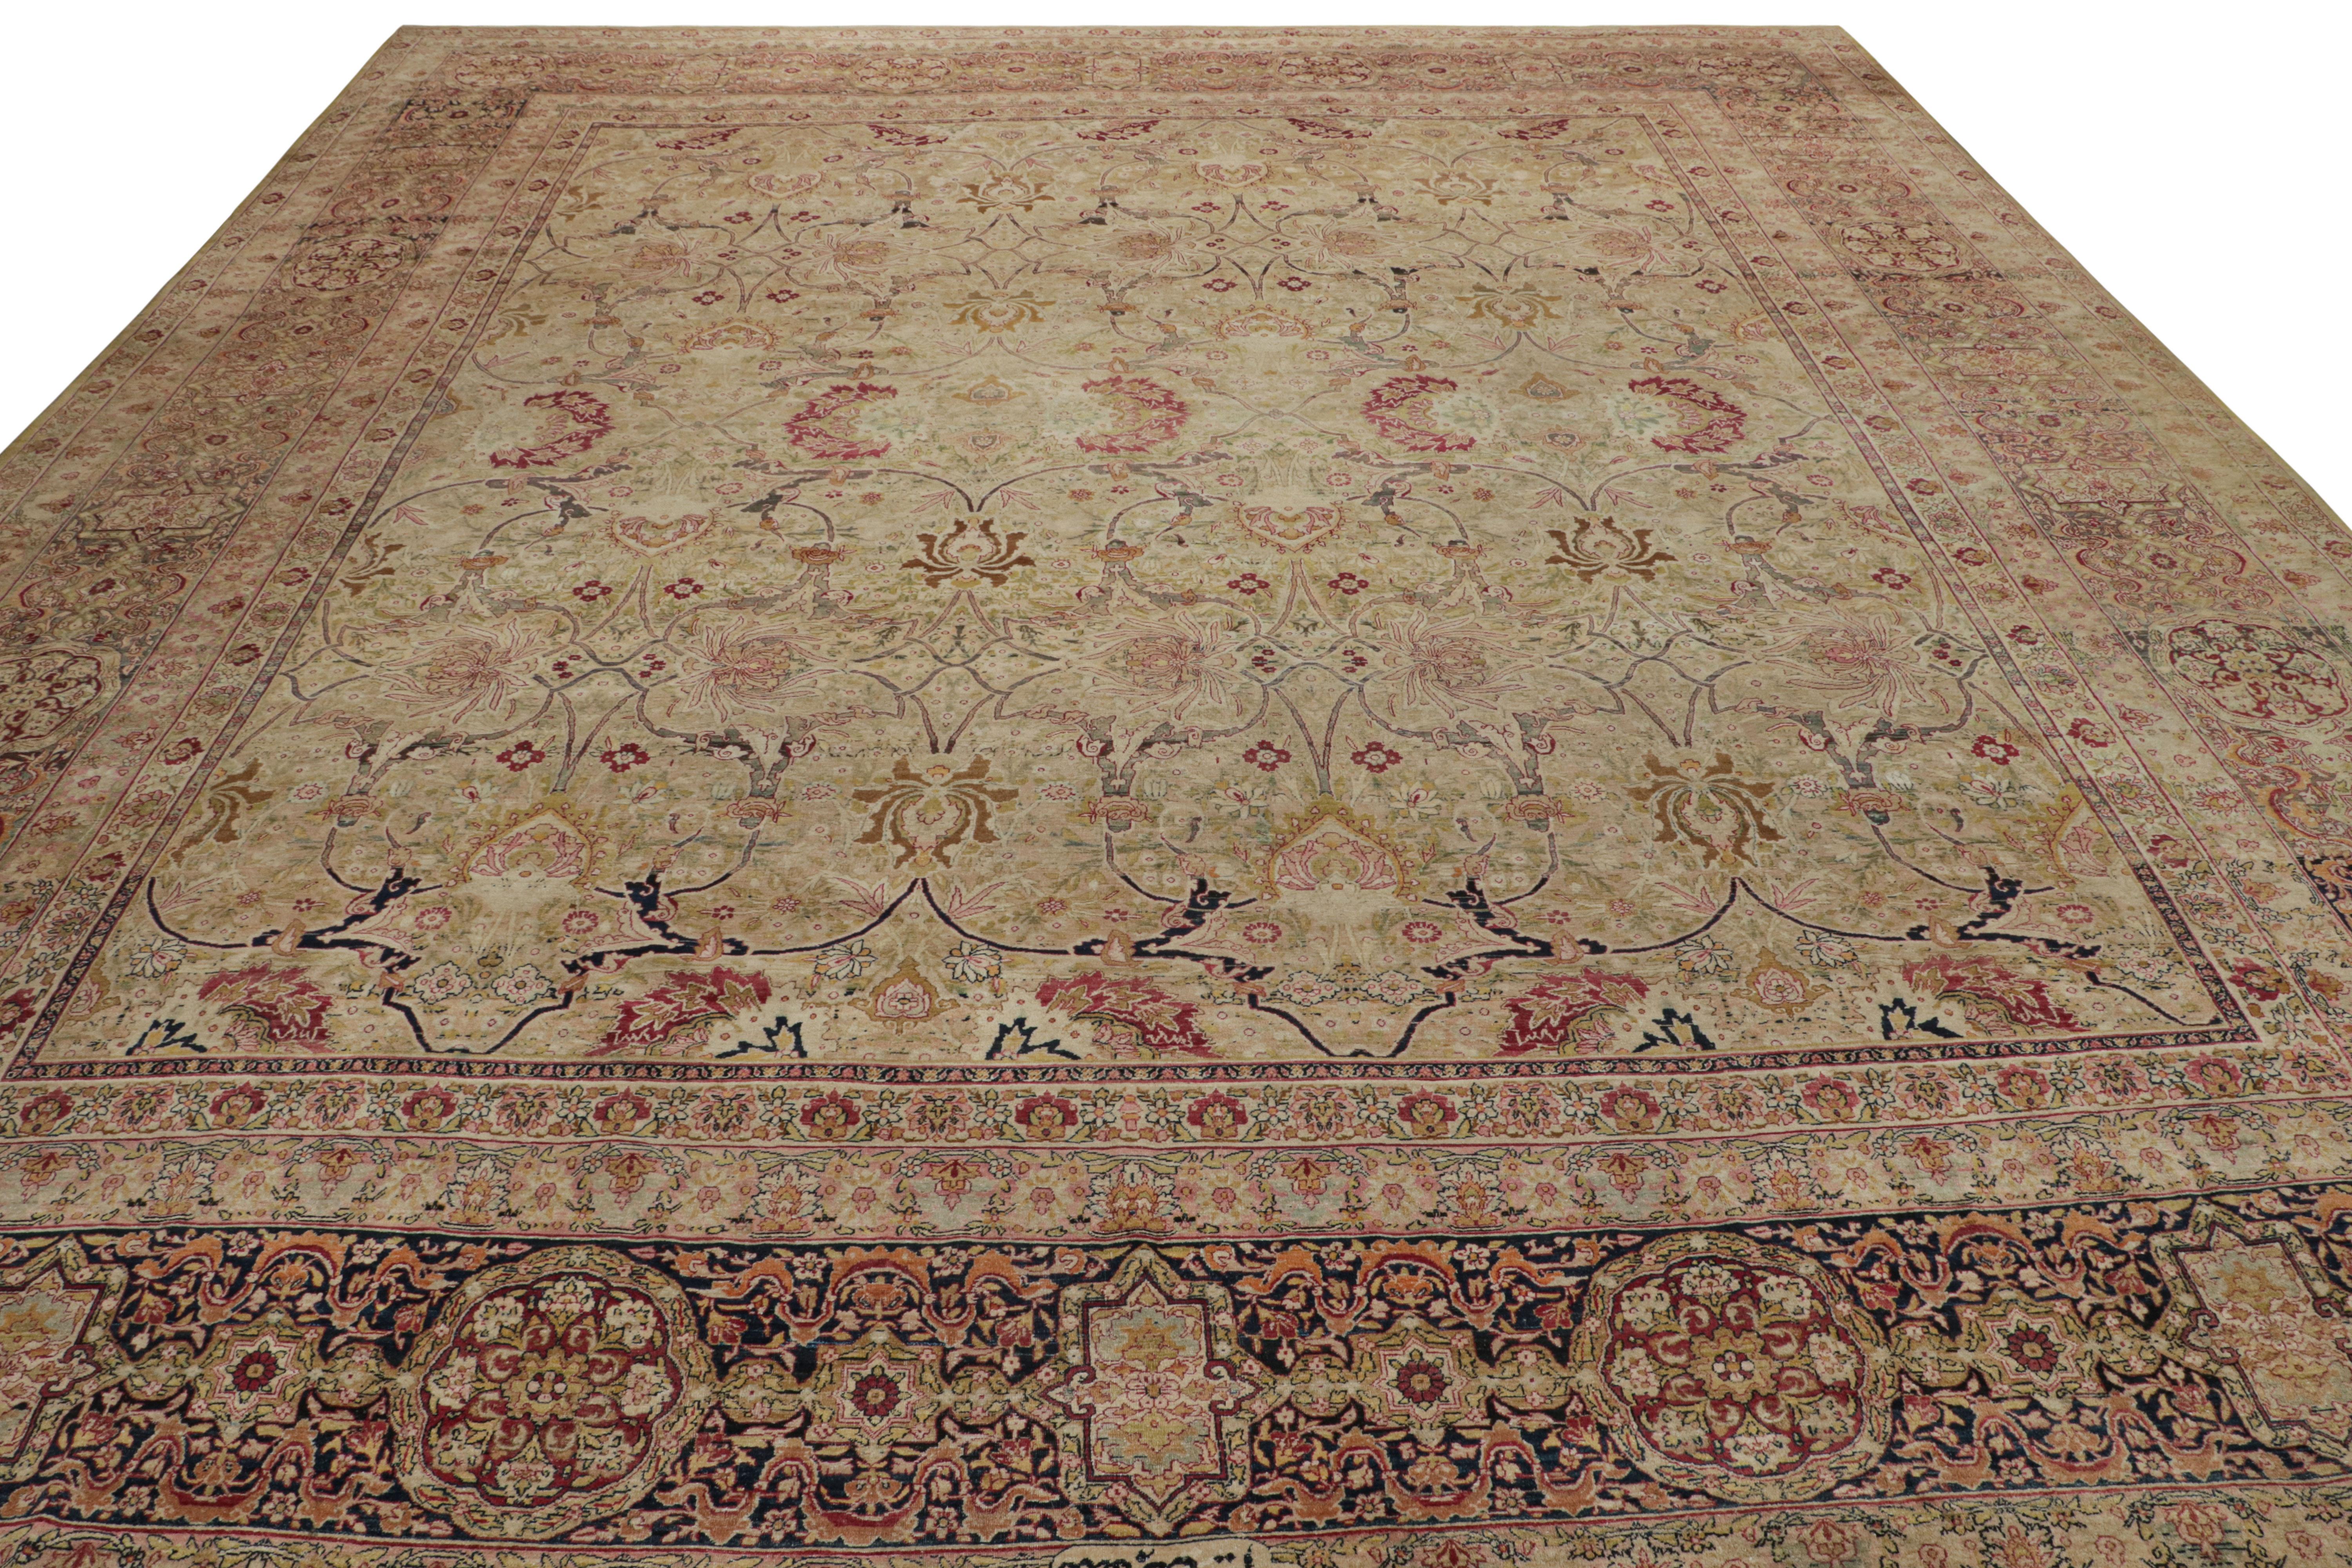 Early 20th Century Antique Persian Kerman Lavar Rug with Floral Patterns For Sale